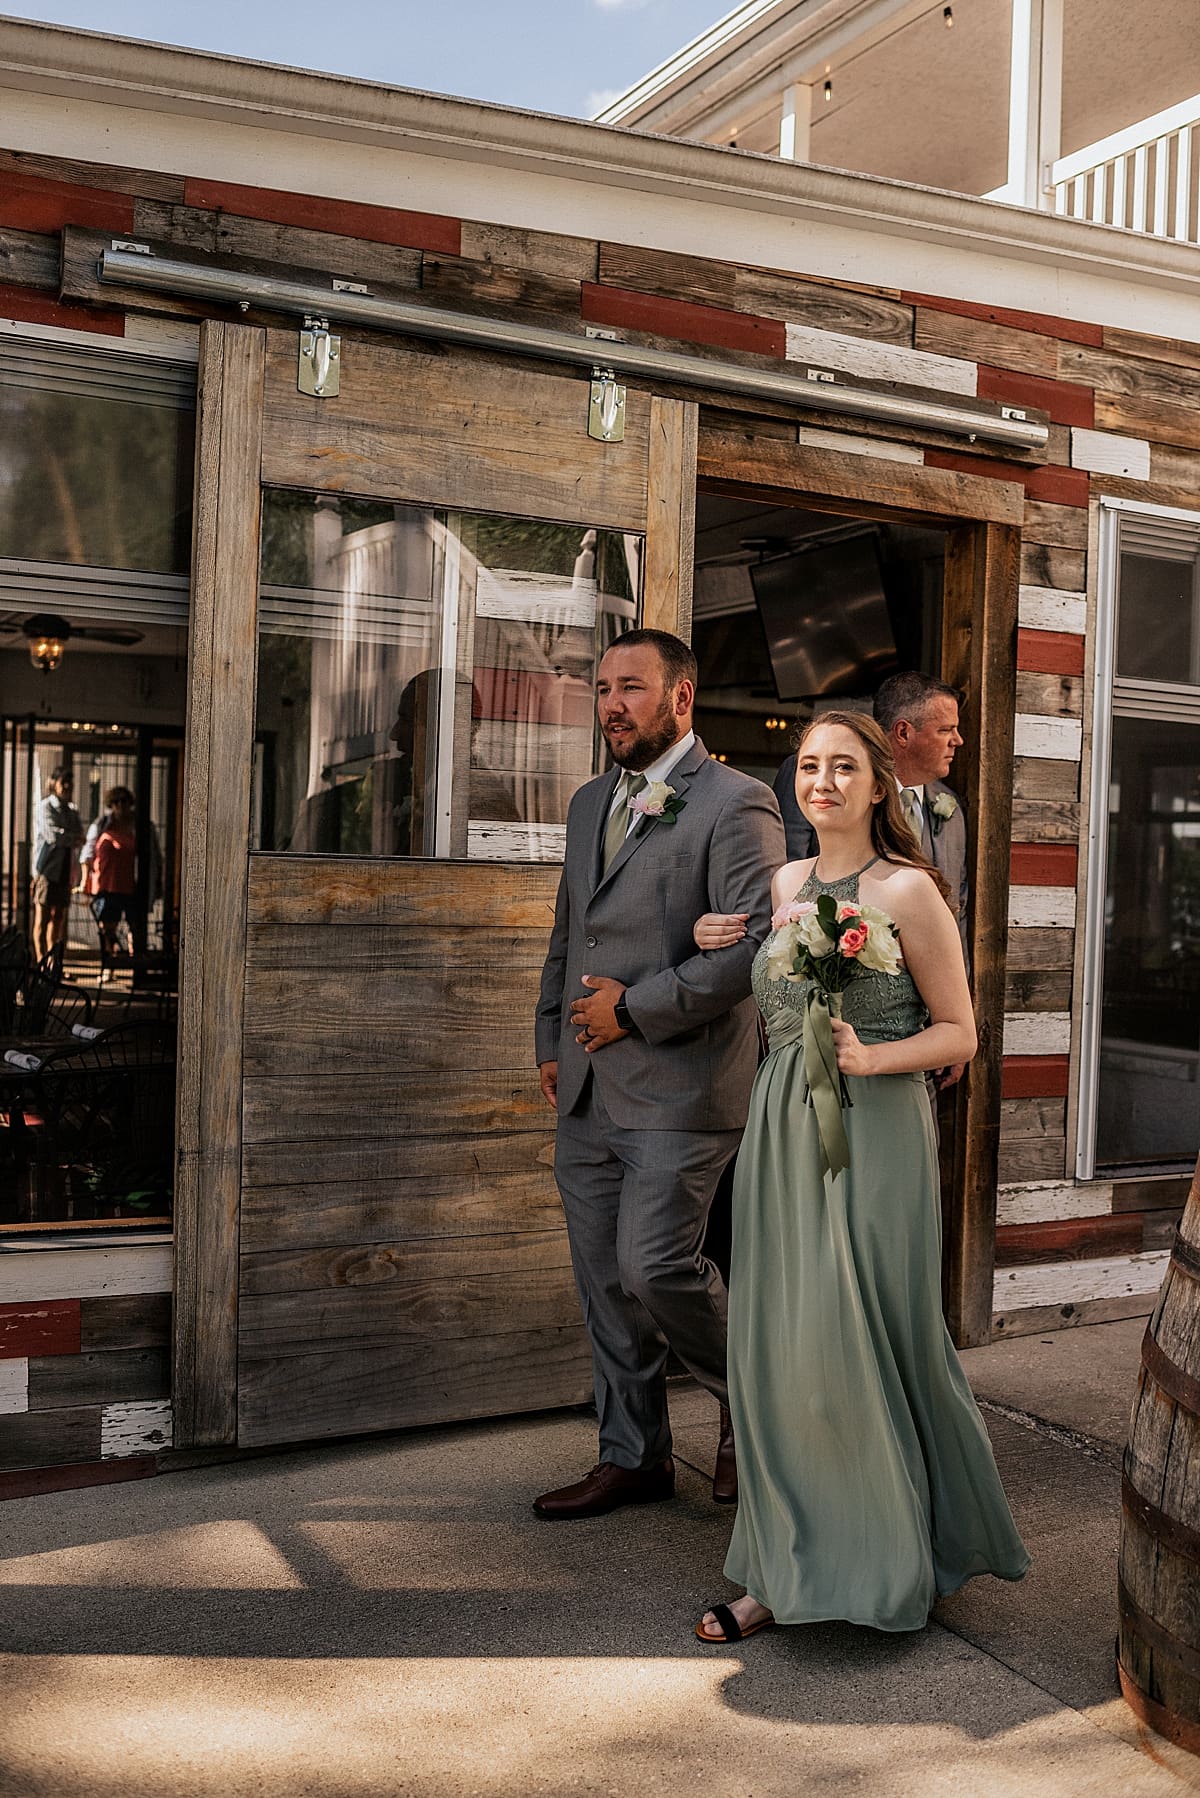 outdoor wedding ceremony at bass bay brewhouse